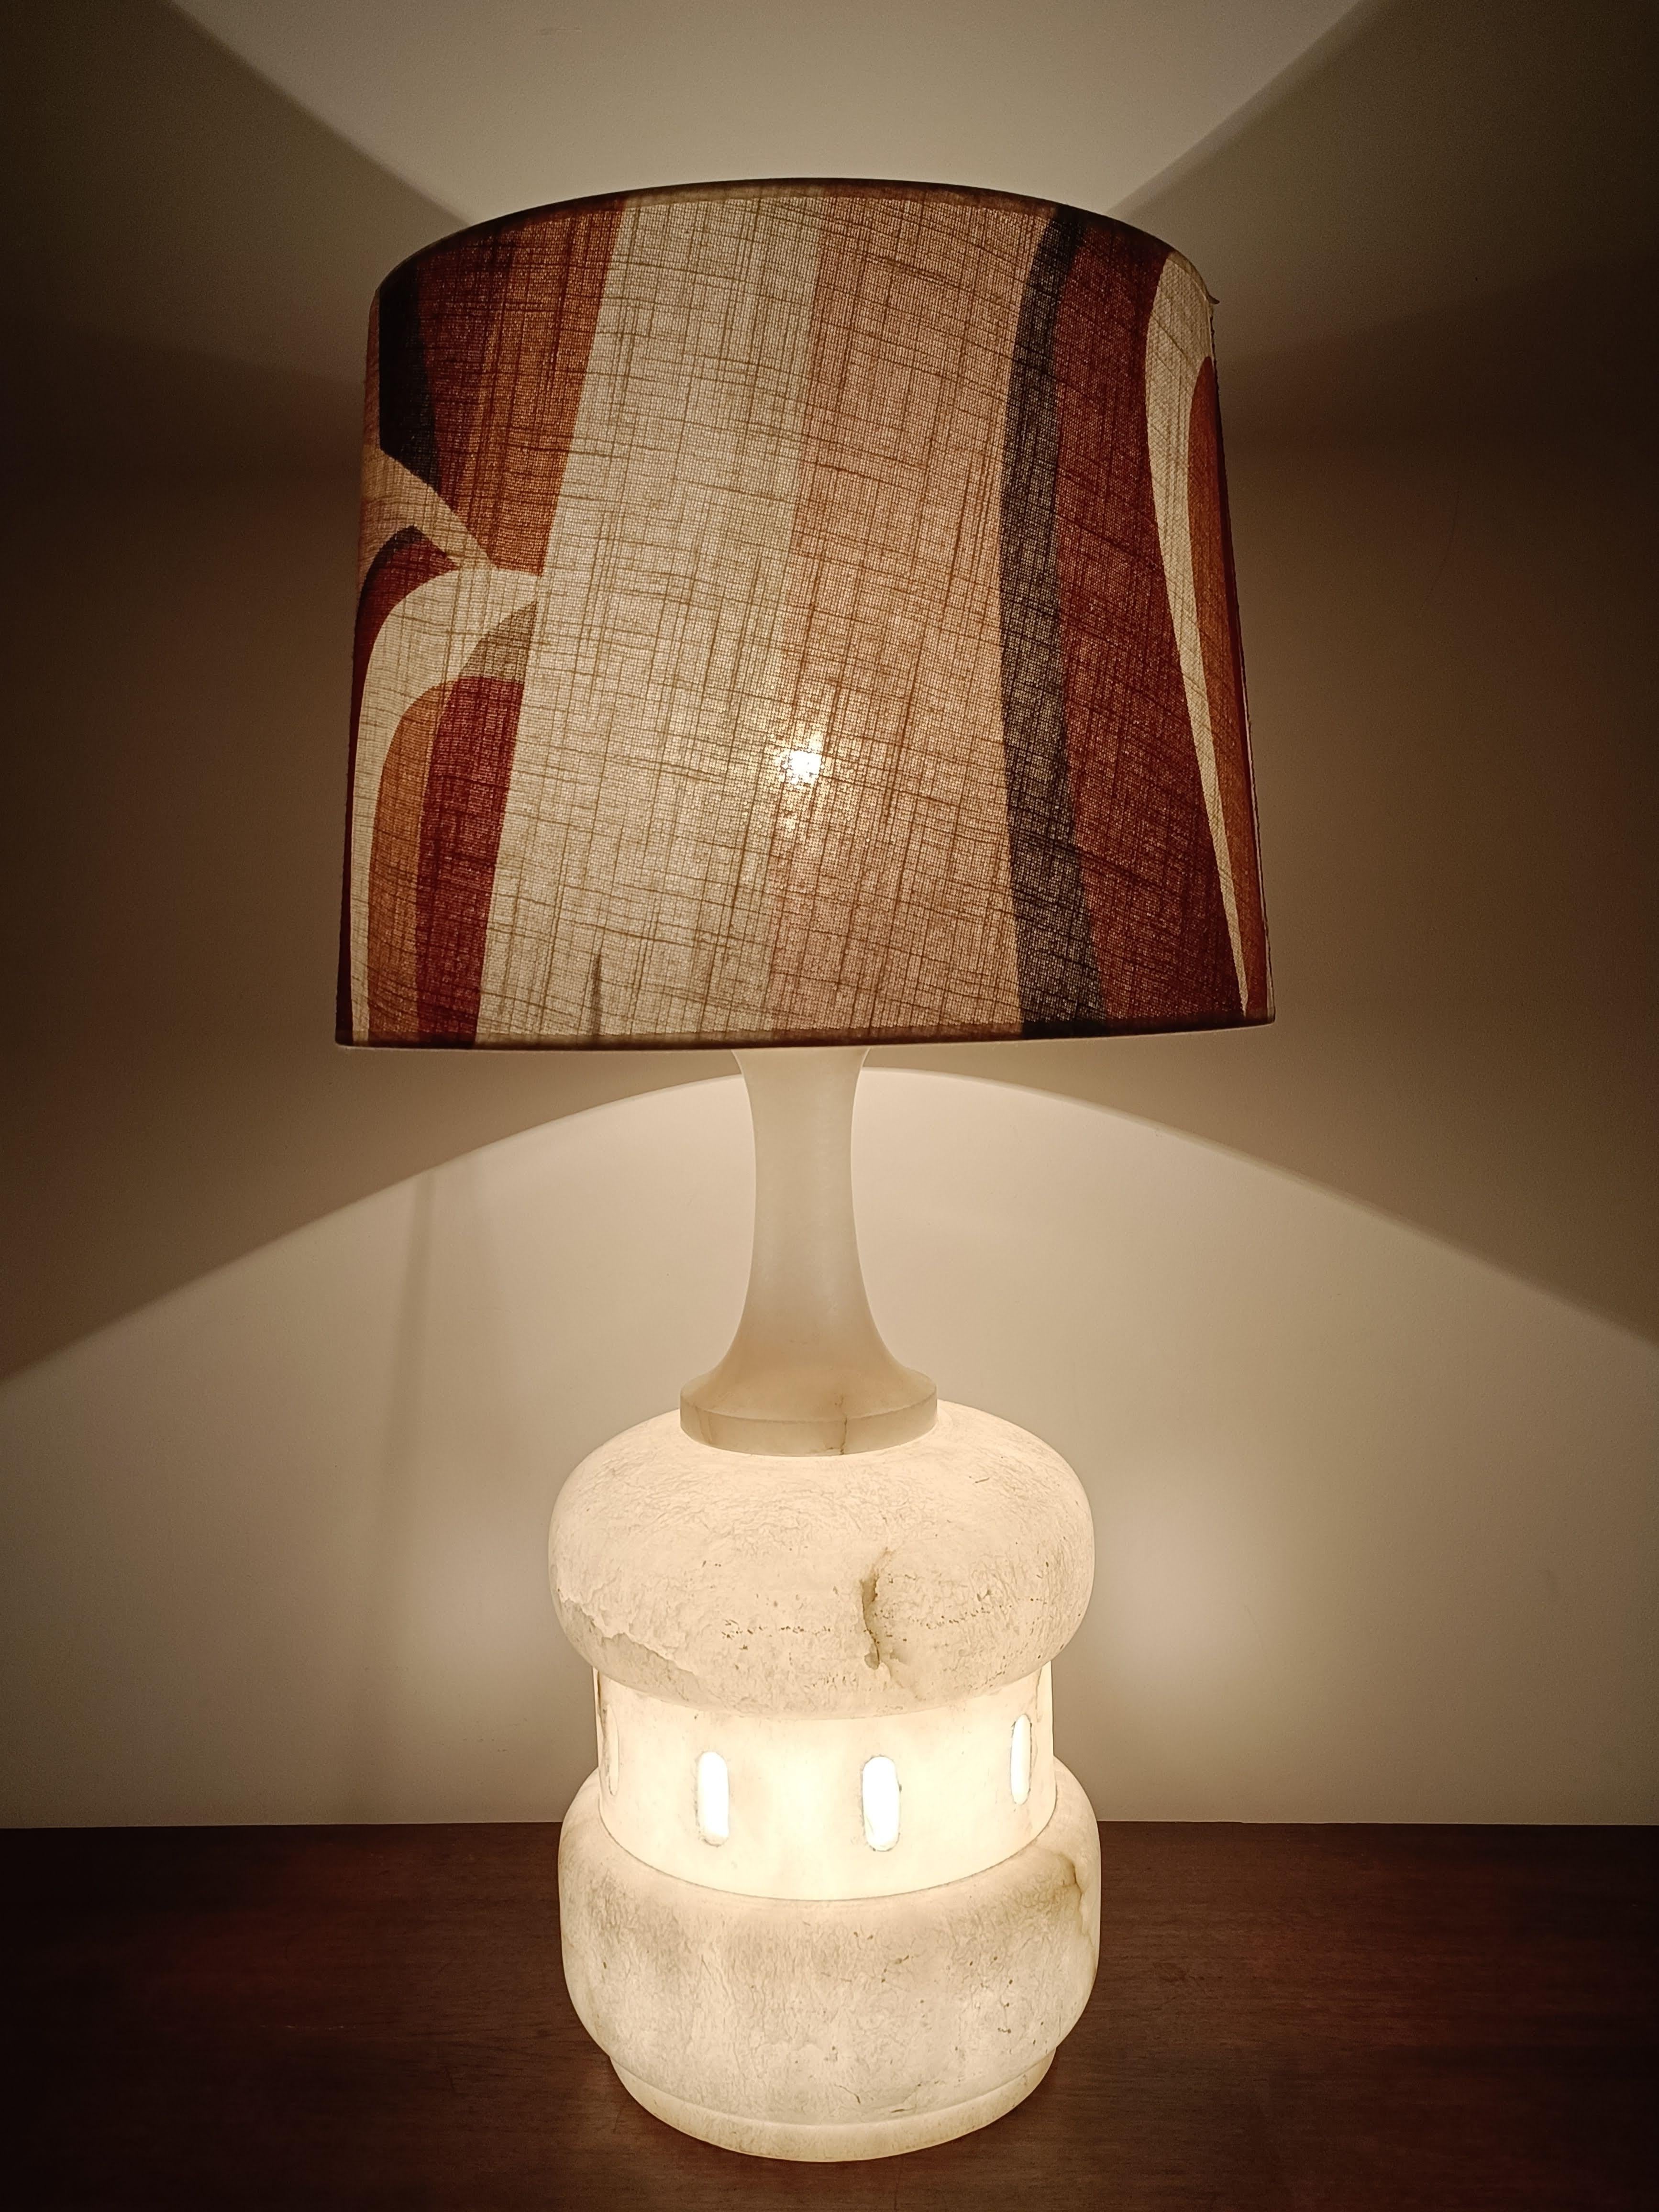 Superb Italian alabaster lamp with custom linen lampshade from Kohroitaly manufacture
.
Dimensions :
Total height of the lamp : 77 cm
Shade height : 30 cm
Shade diameter : 40 cm
Diameter of the lamp base : 26 cm
.
It has a double lighting : the